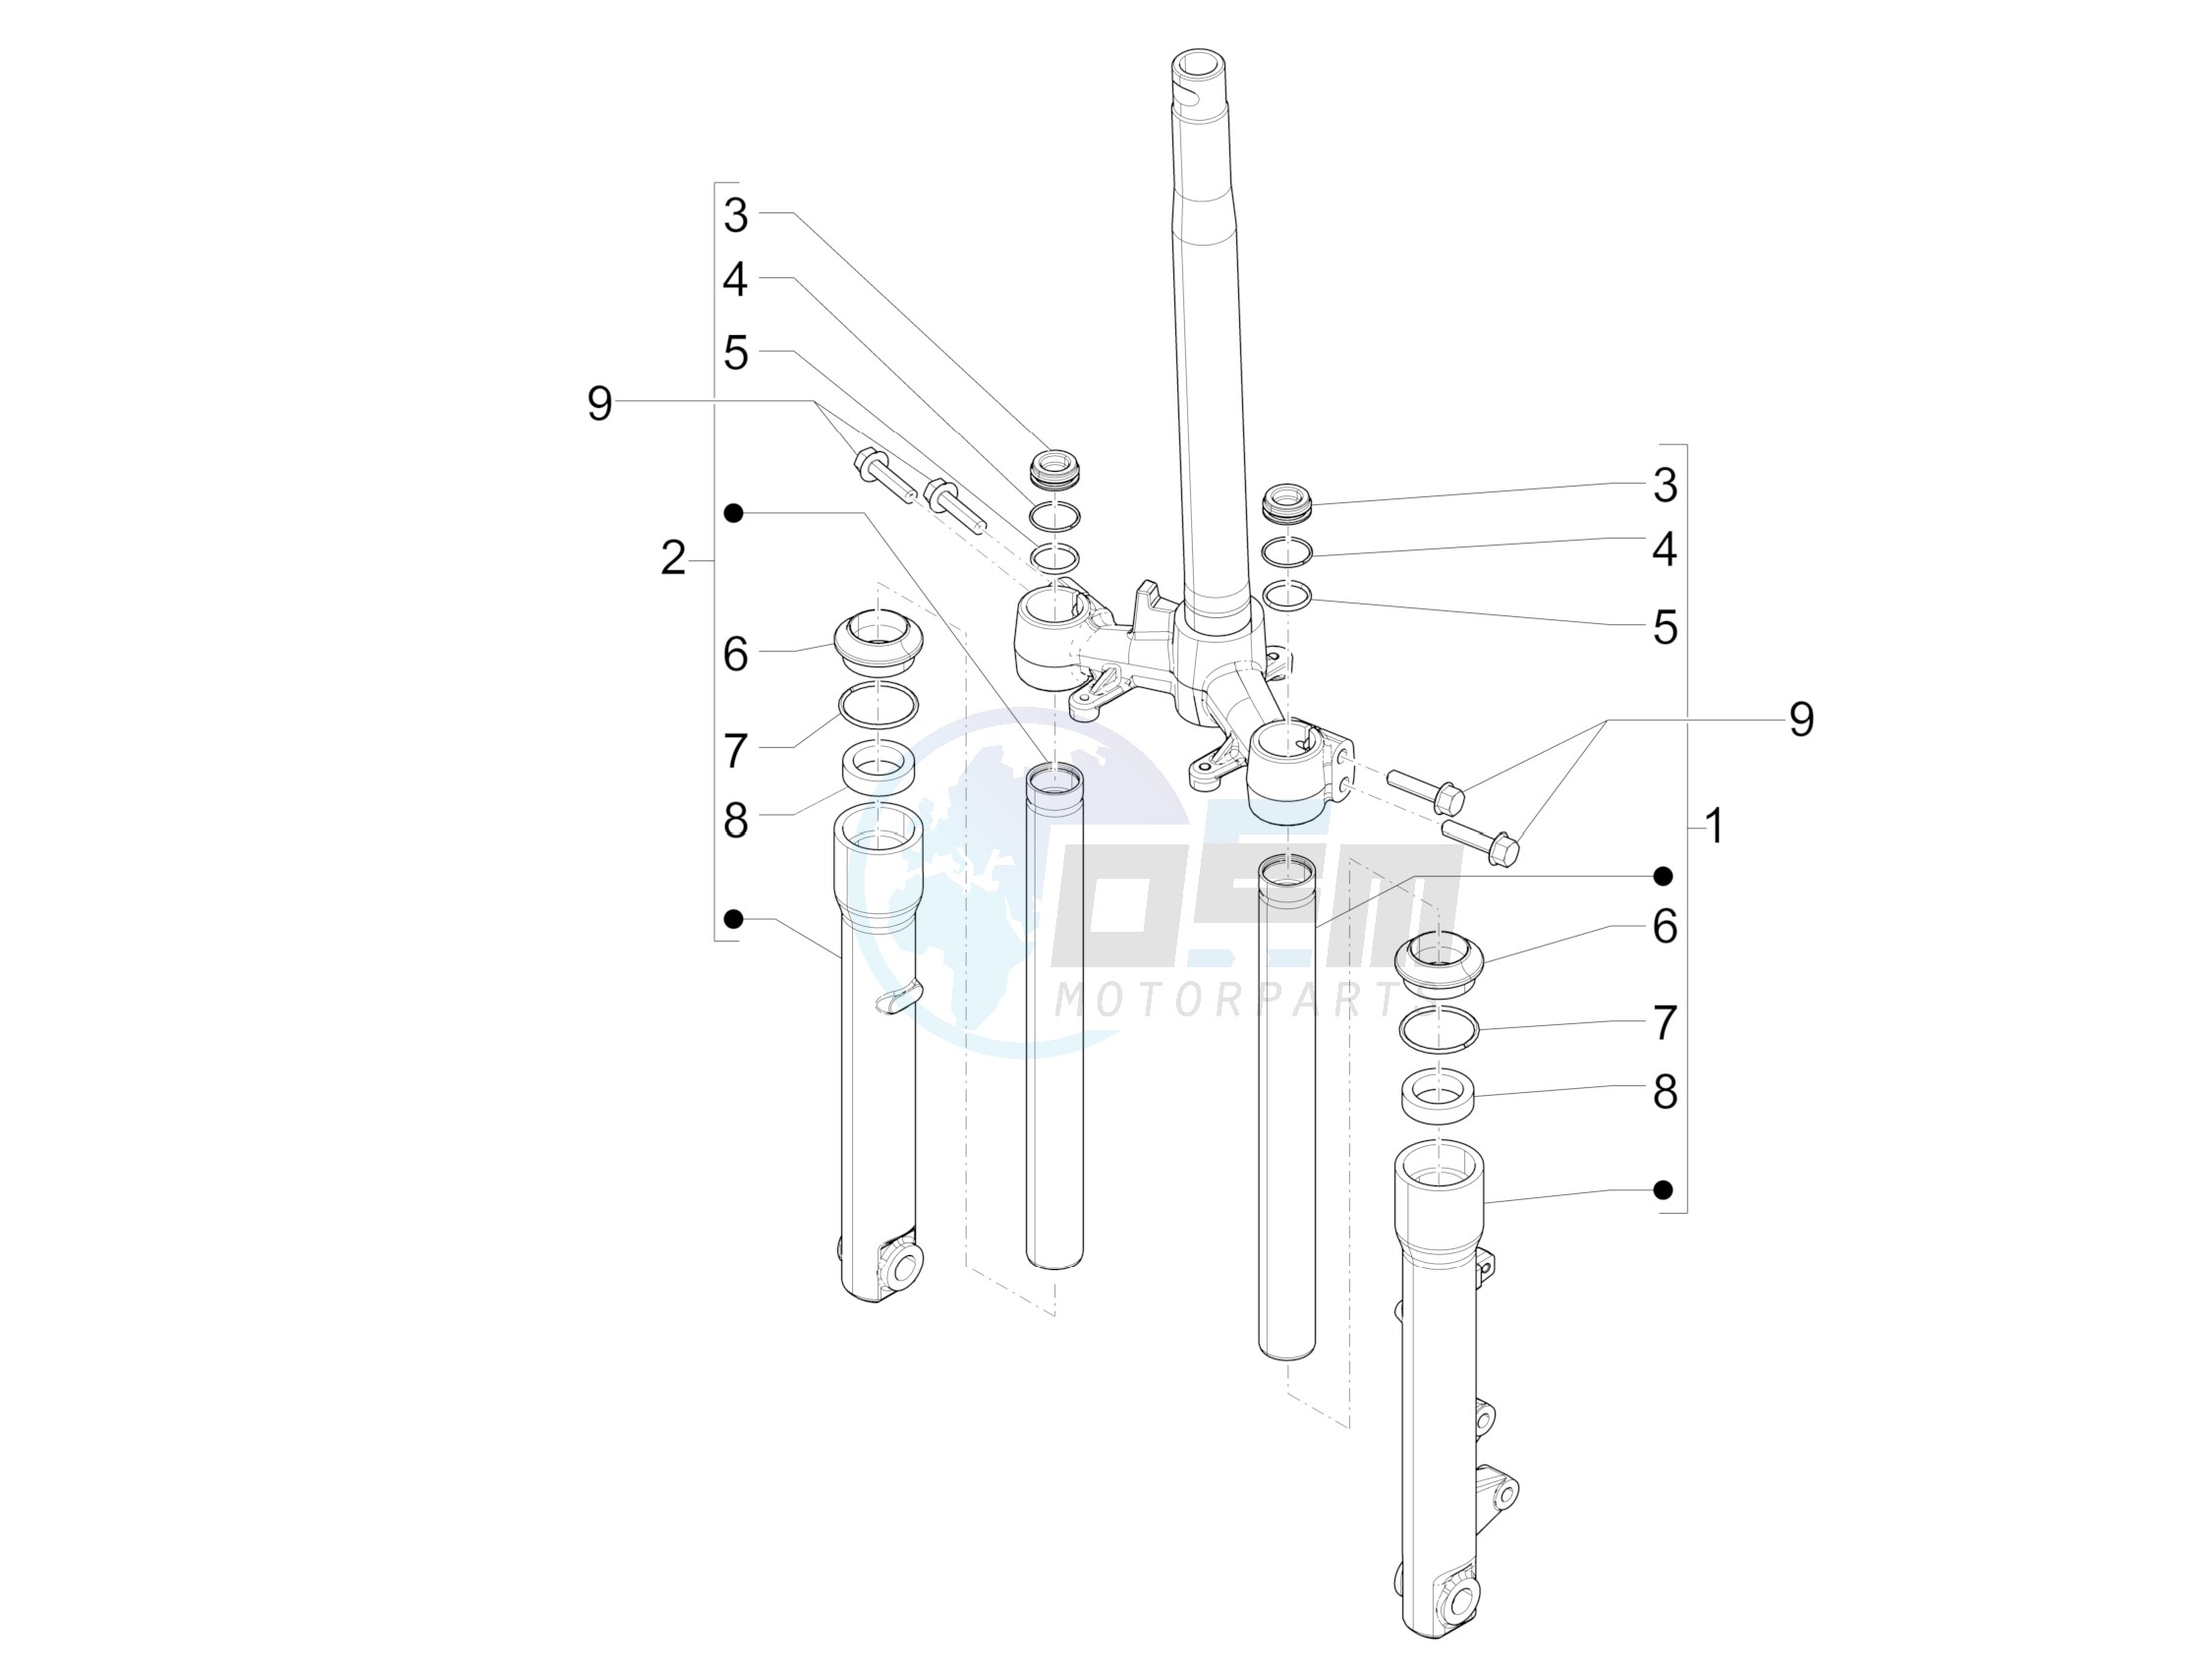 Fork's components (Wuxi Top) image